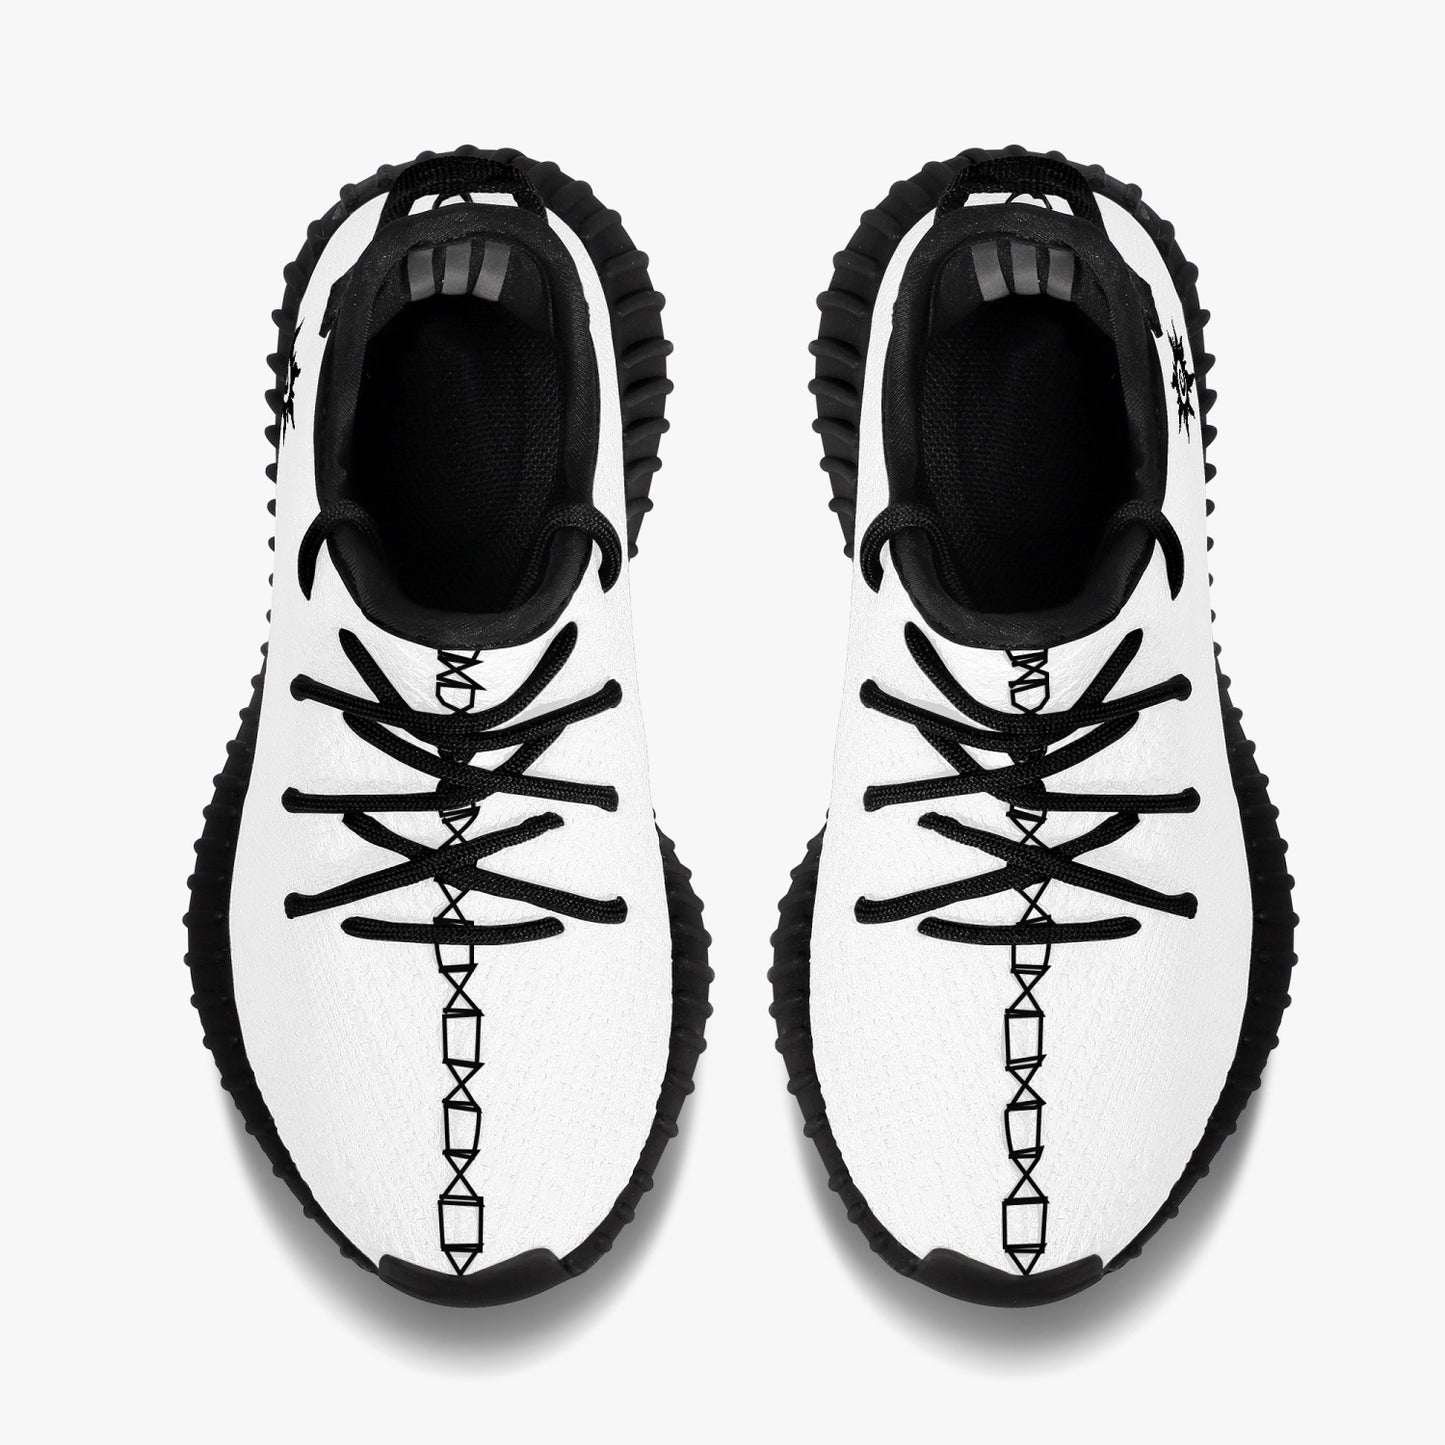 Kids' Mesh Knit Sneakers -  White and Black